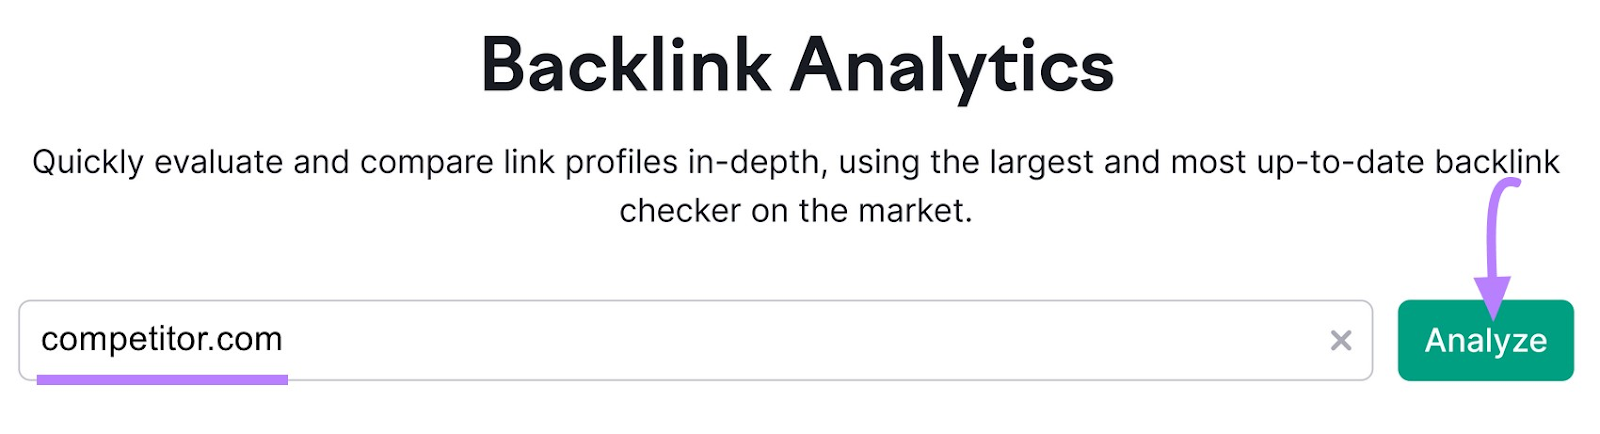 search for competitor in Backlink Analytics tool